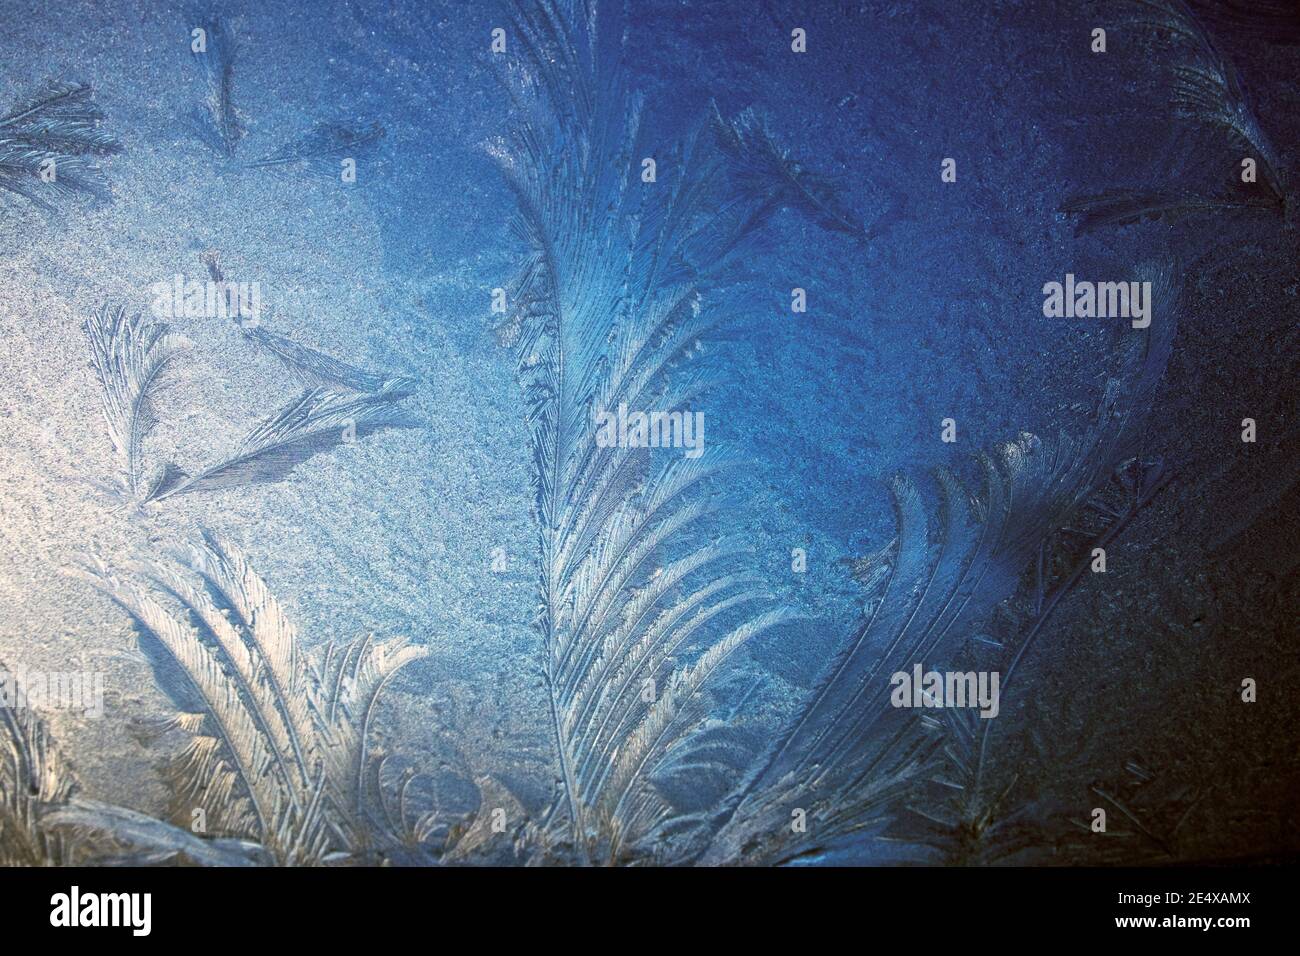 Ice and Frost Form on Window Stock Image - Image of cozy